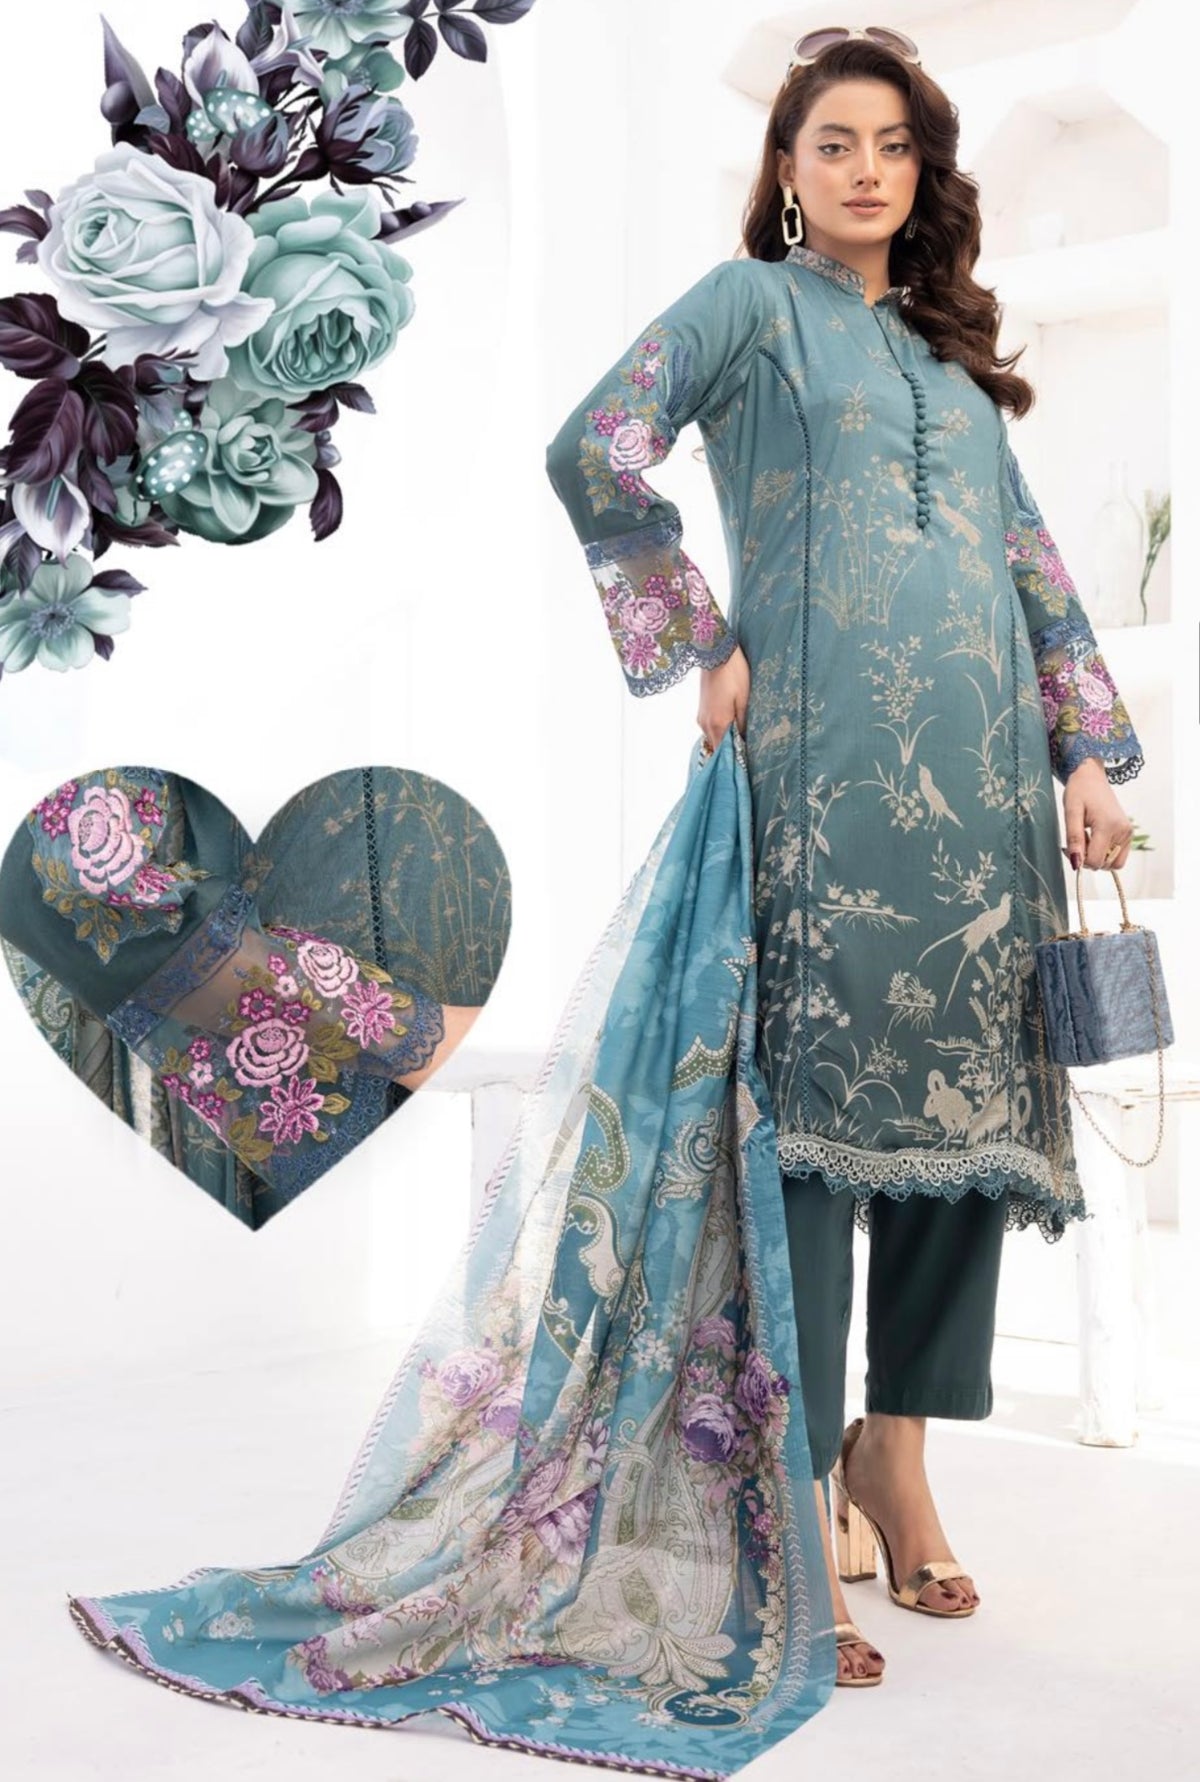 MB BY SIMRANS EMBROIDERED COLLECTION MBLS025